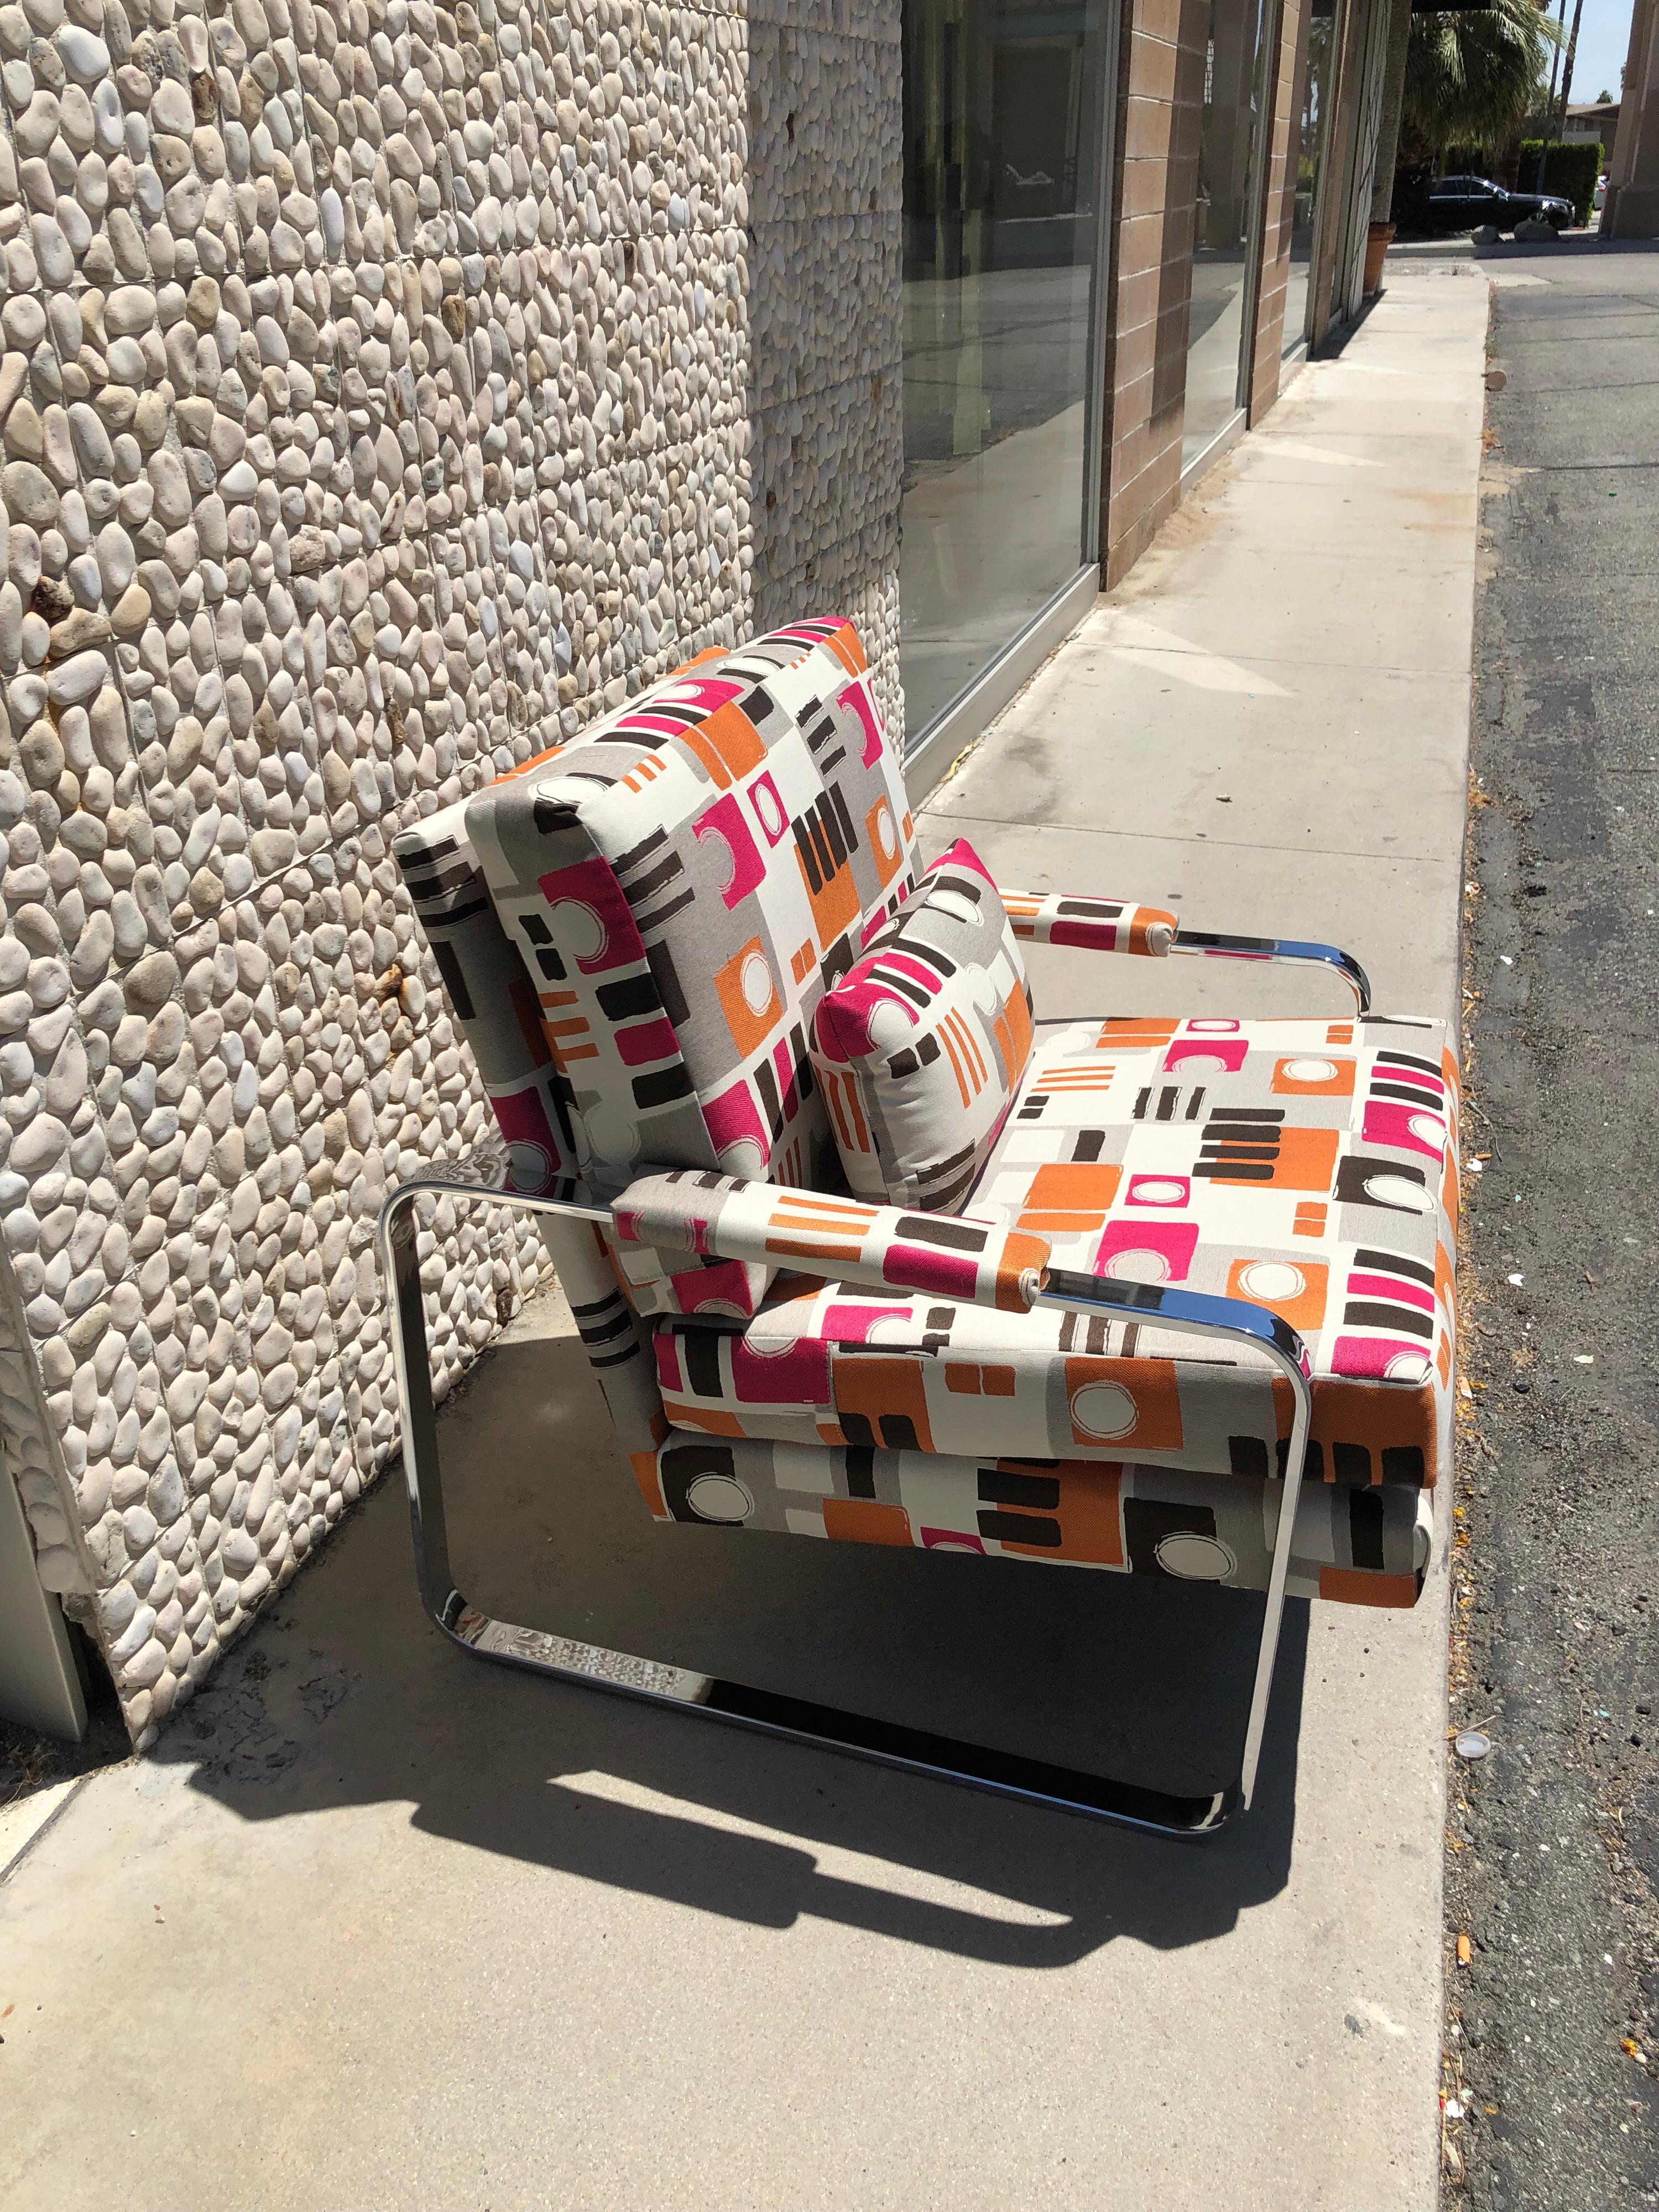 This modern chrome club chair was made in the 1970s. In the style of the iconic Milo Baughman chrome armchair. The chair has been redone in a very high end modern art jacquard fabric. A beautiful modern art chair.